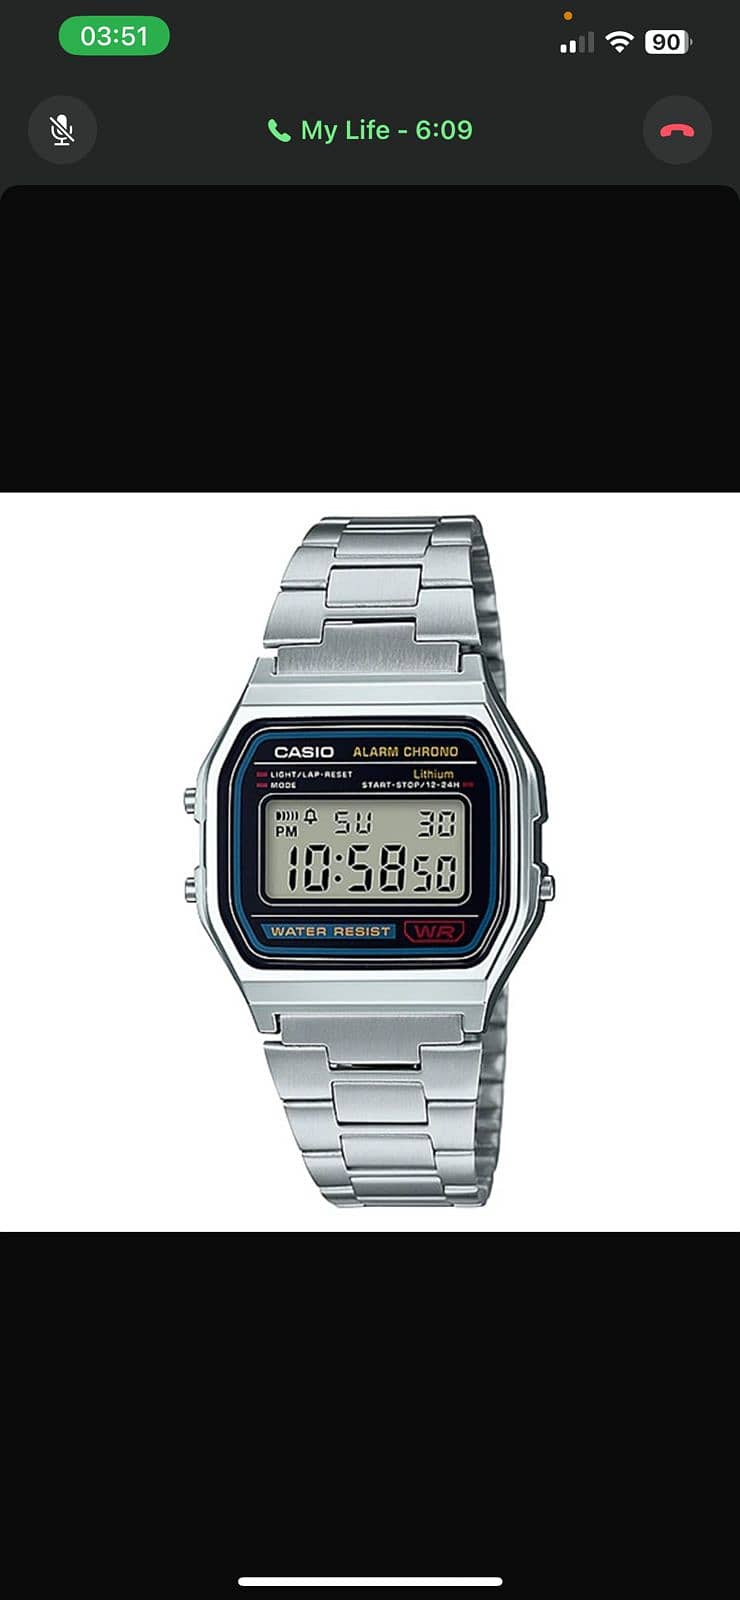 Casio watches on discounted prices 17